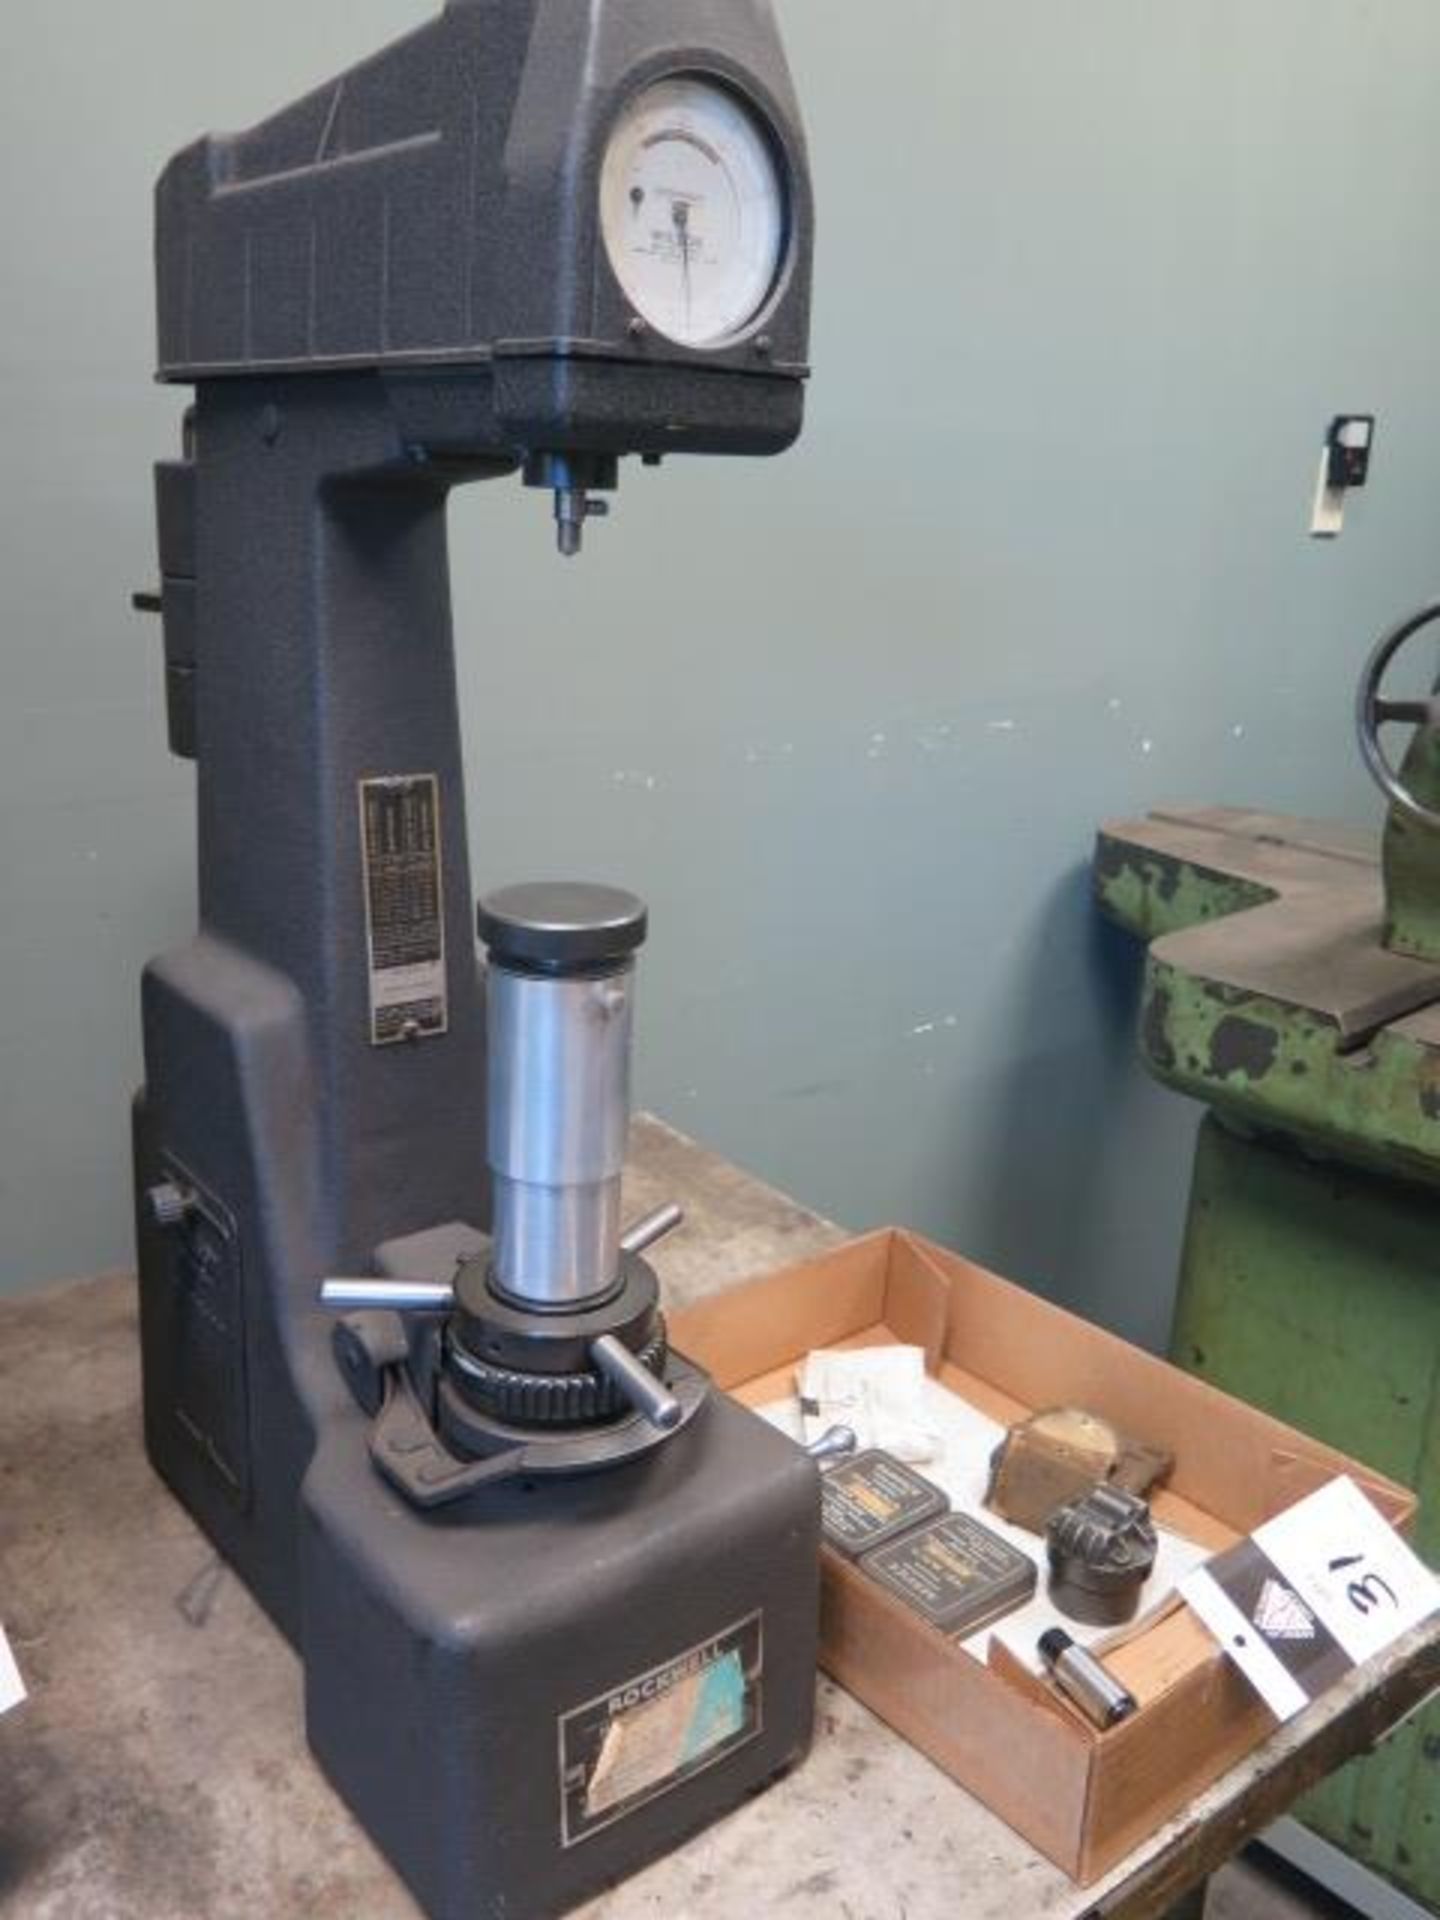 Rockwell 4JR Rockwell Hardness Tester s/n 5081 (SOLD AS-IS - NO WARRANTY) - Image 2 of 8